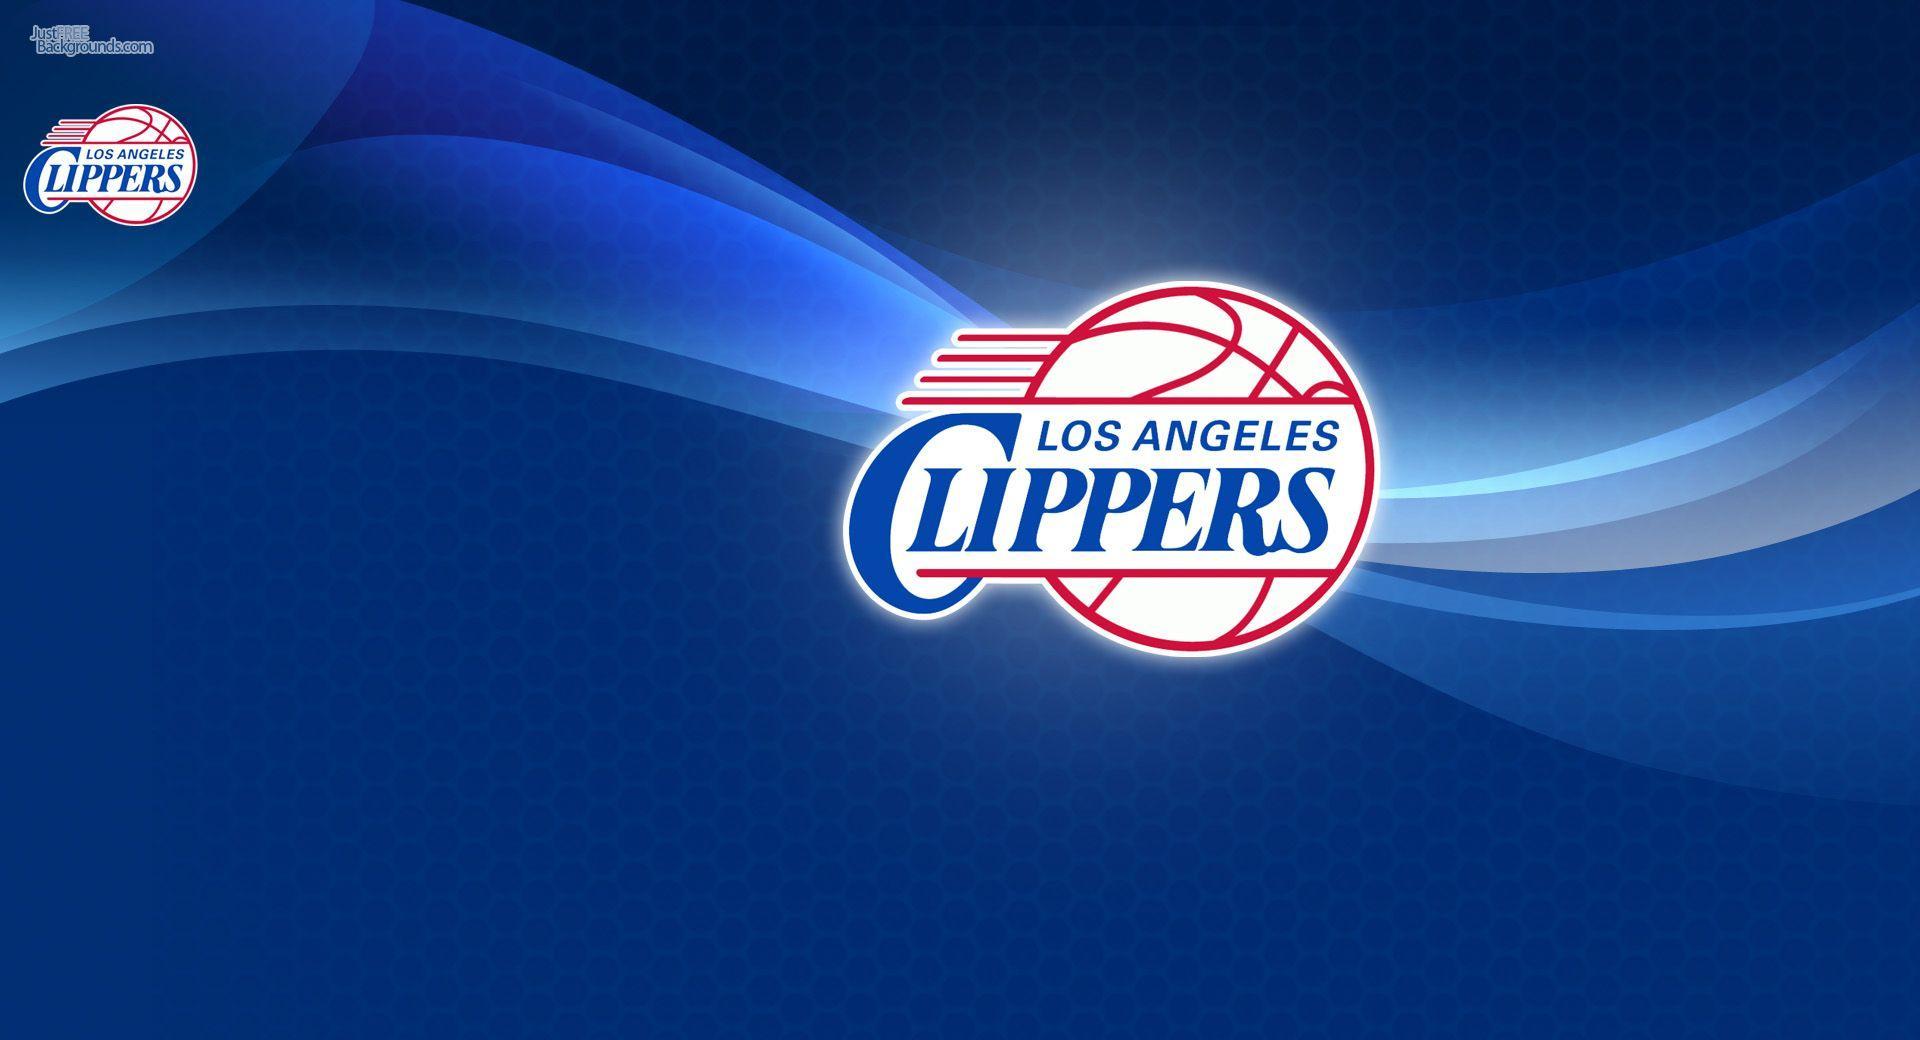 Logos, Wallpaper and Los angeles clippers